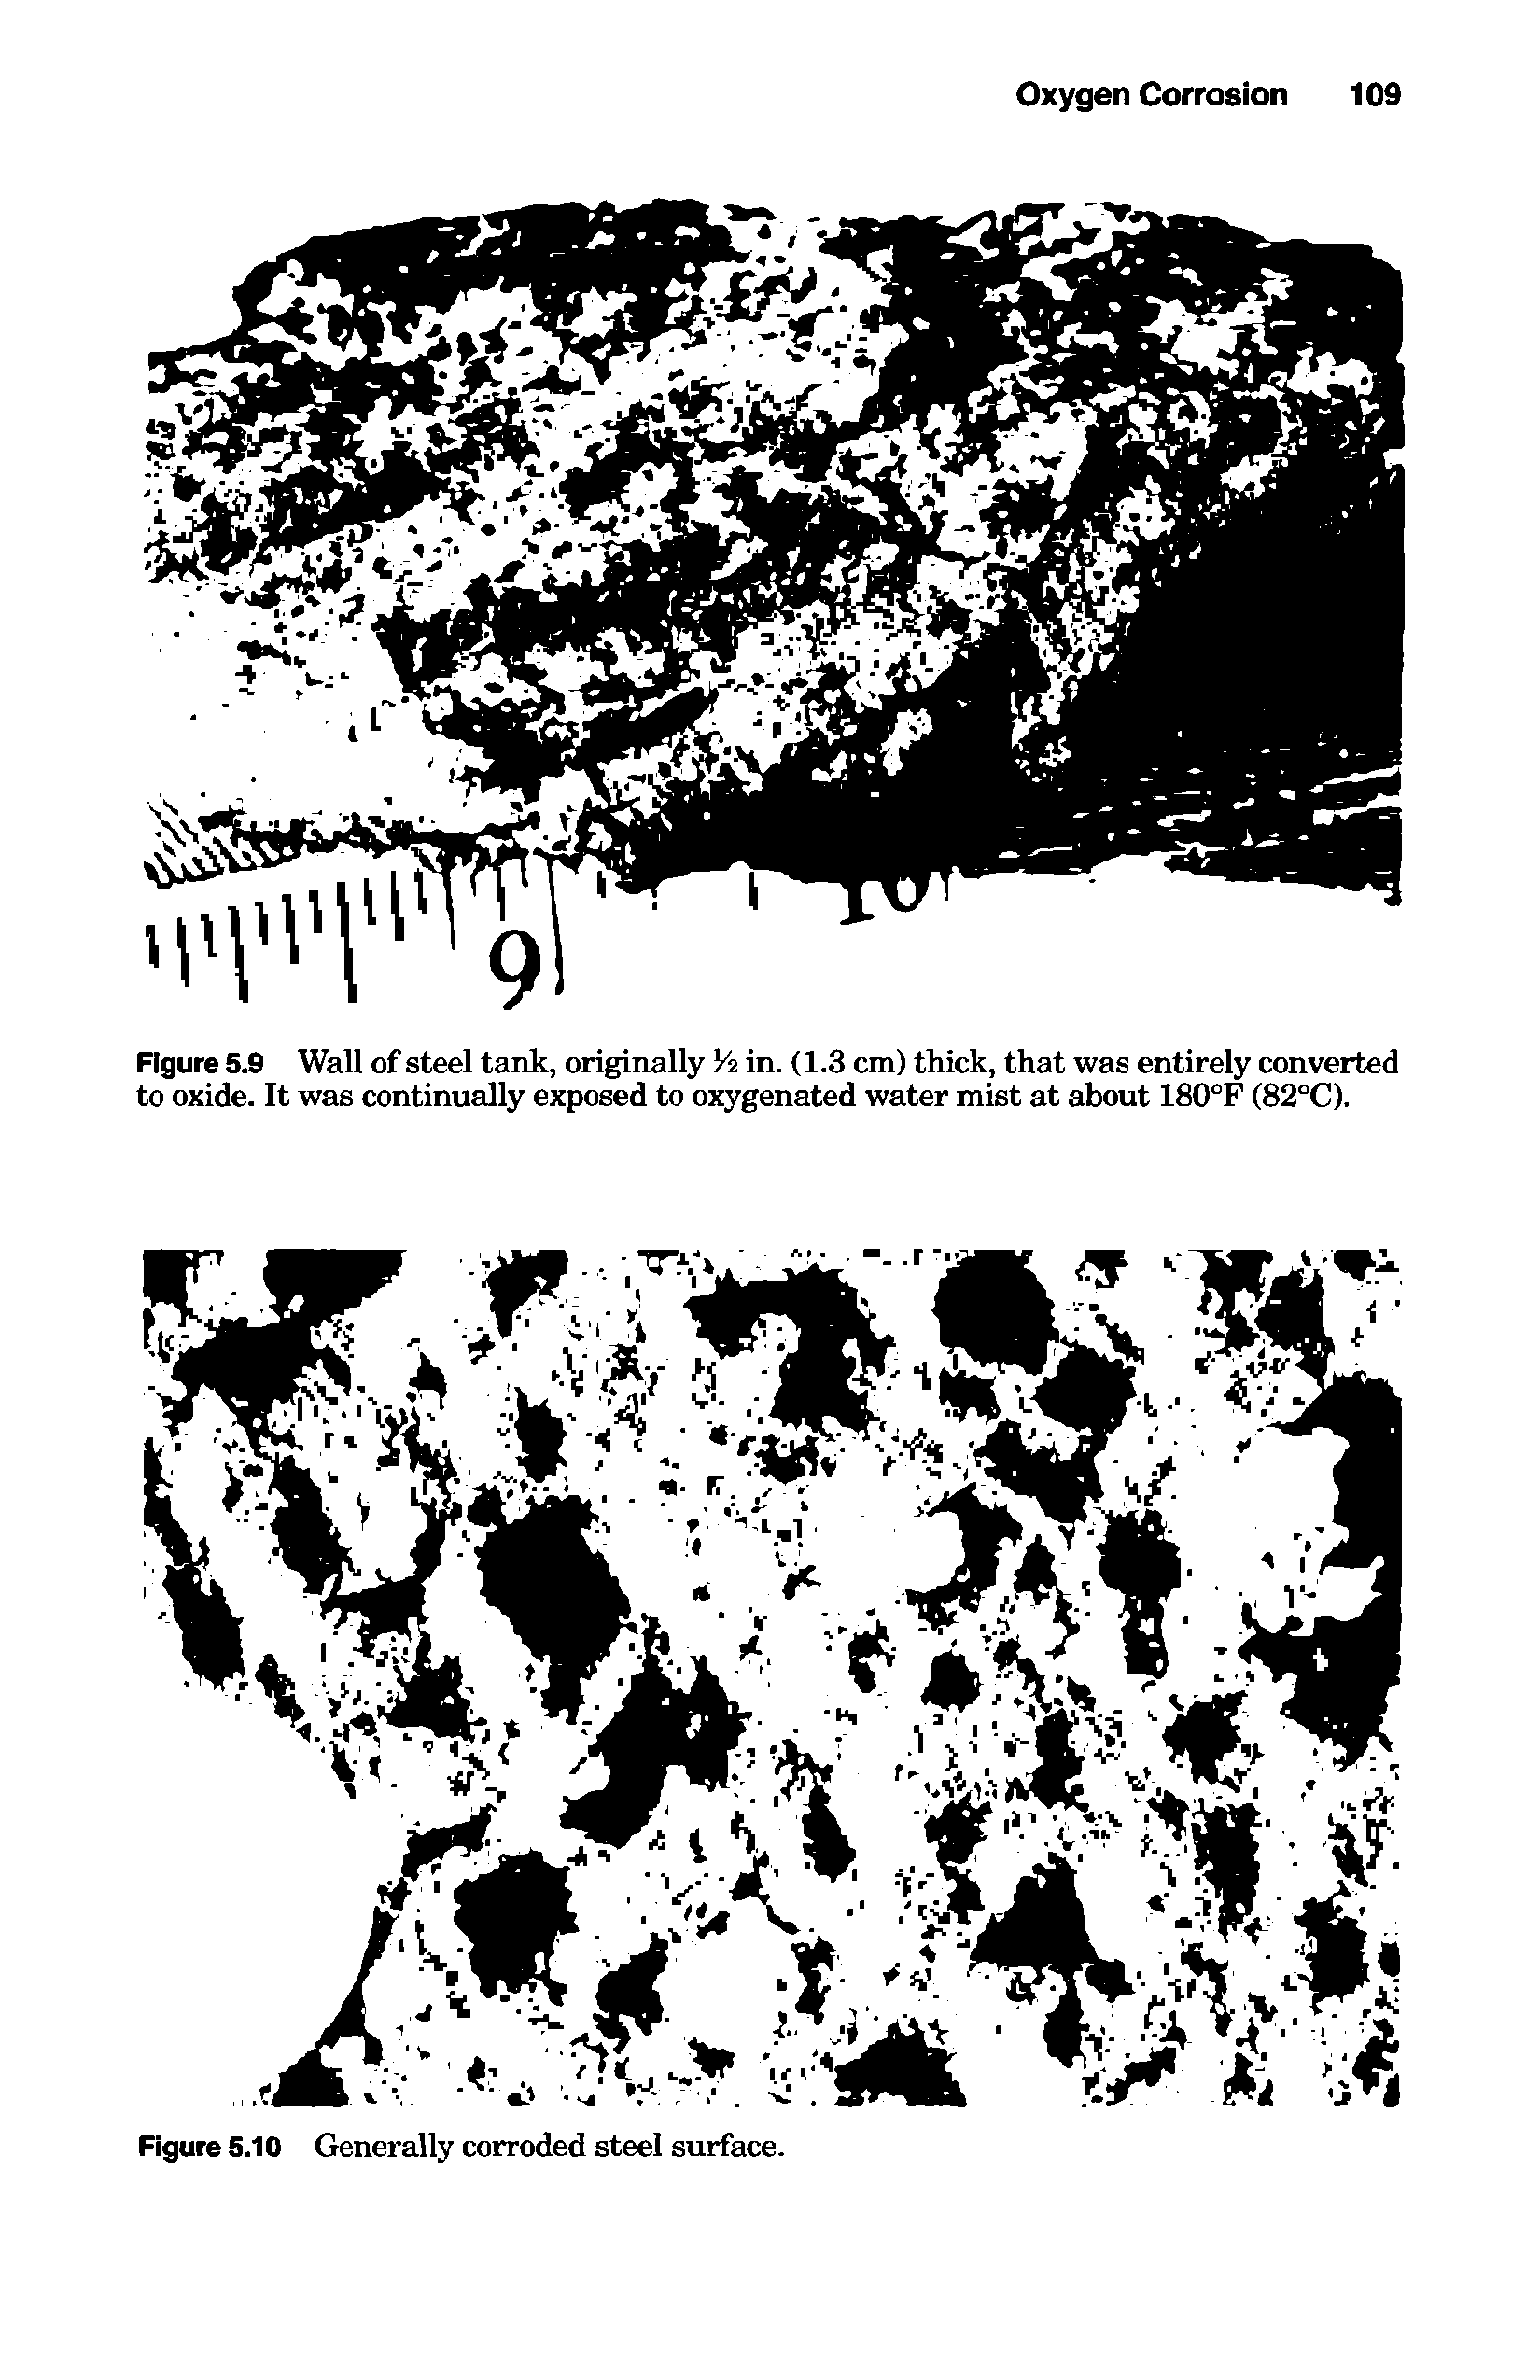 Figure 5.9 Wall of steel tank, originally V2 in. (1.3 cm) thick, that was entirely converted to oxide. It was continuedly exposed to oxygenated water mist at about 180°F (82°C).